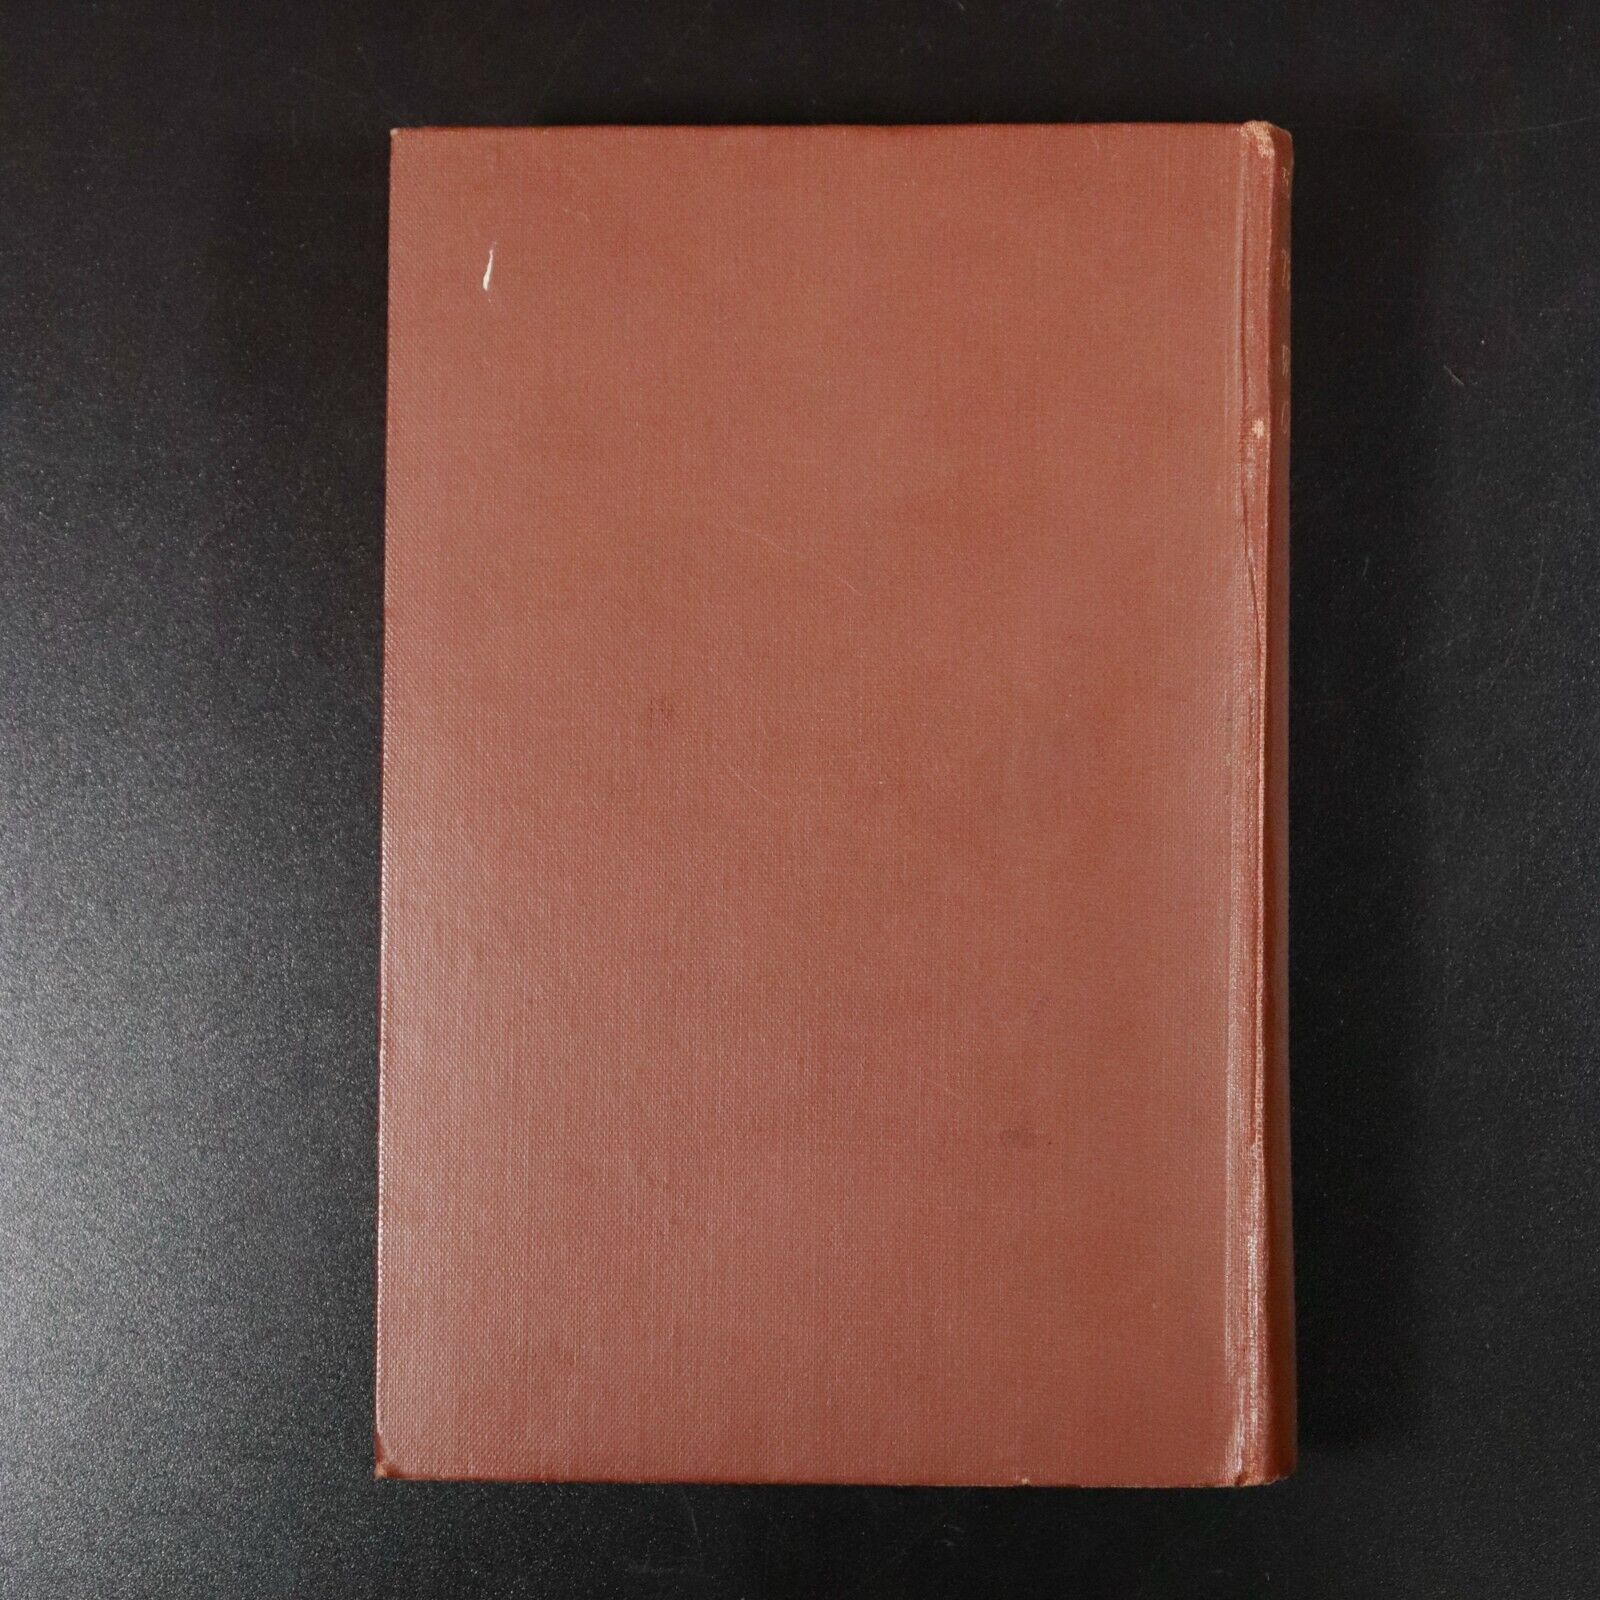 1926 The World Of William Clissold by H.G. Wells Antique Fiction Book Vol 1